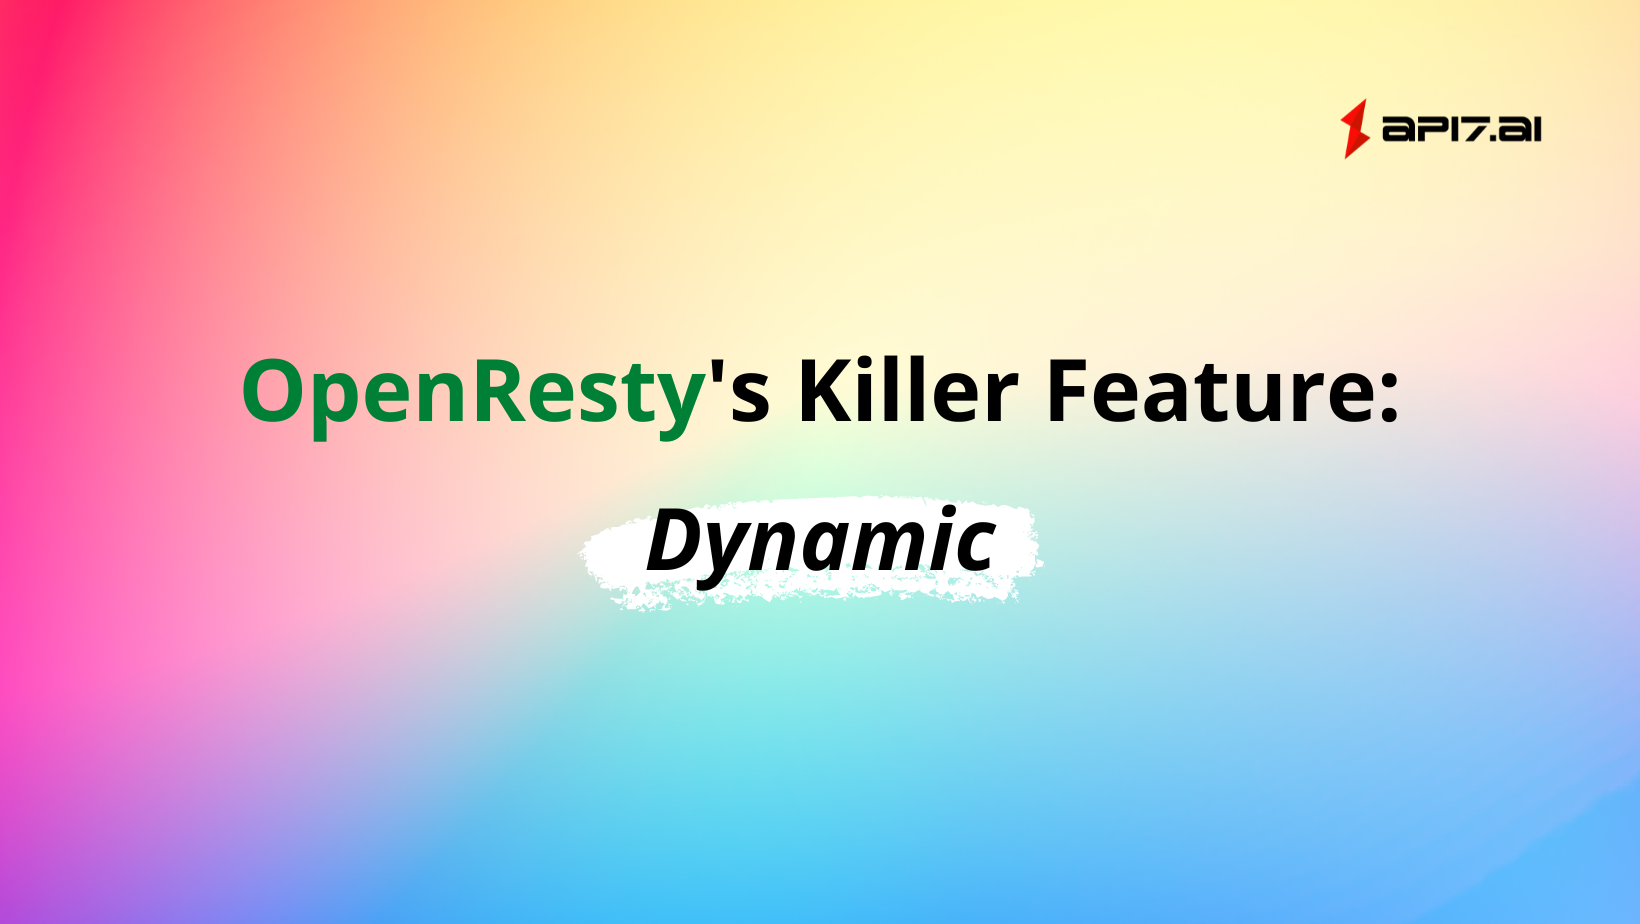 OpenResty's Killer Feature: Dynamic